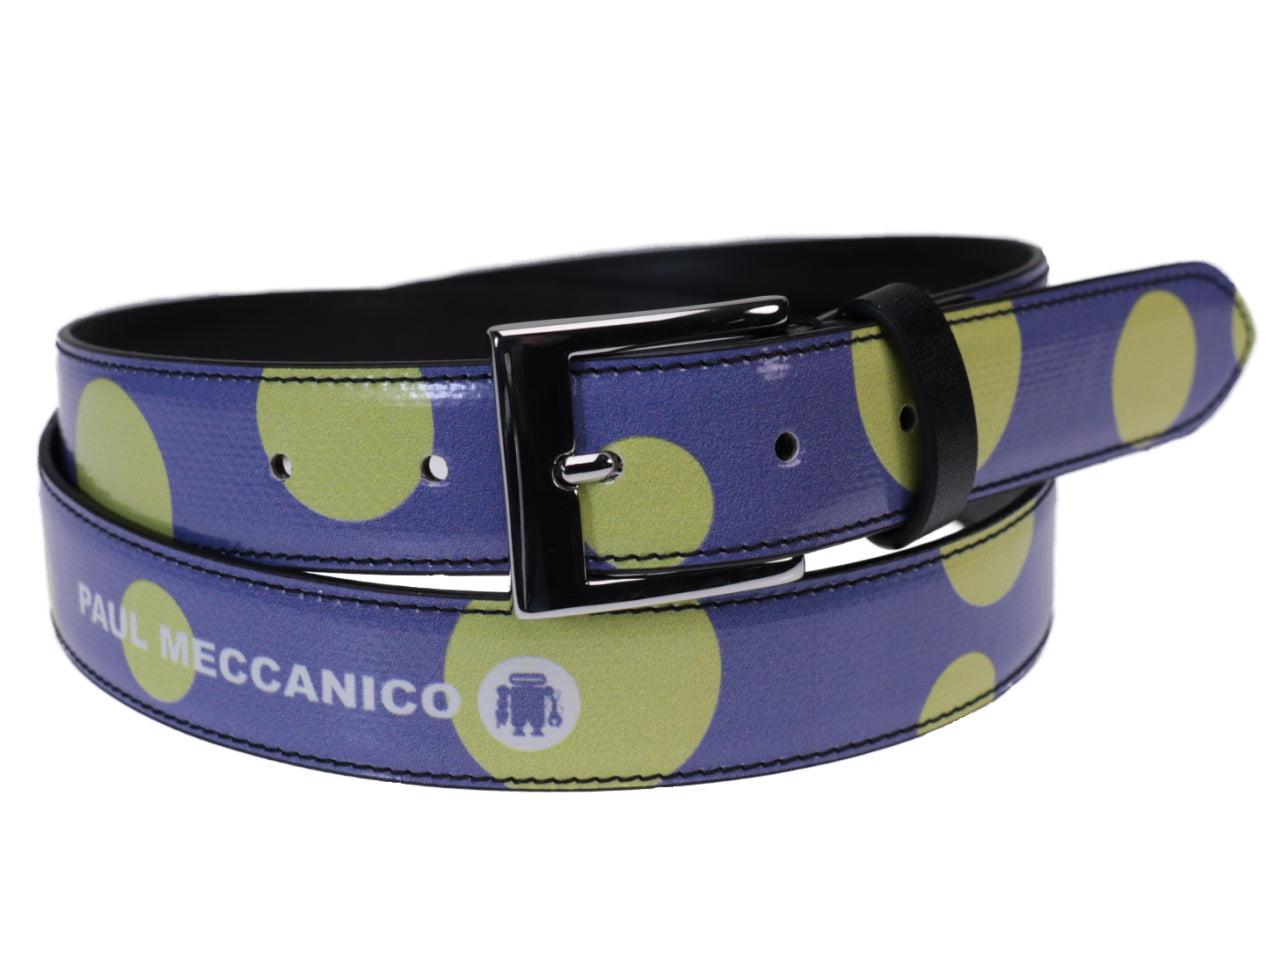 WOMAN'S BELT LILAC WITH YELLOW DOTS MADE OF LORRY TARPAULIN. - Unique Pieces Paul Meccanico